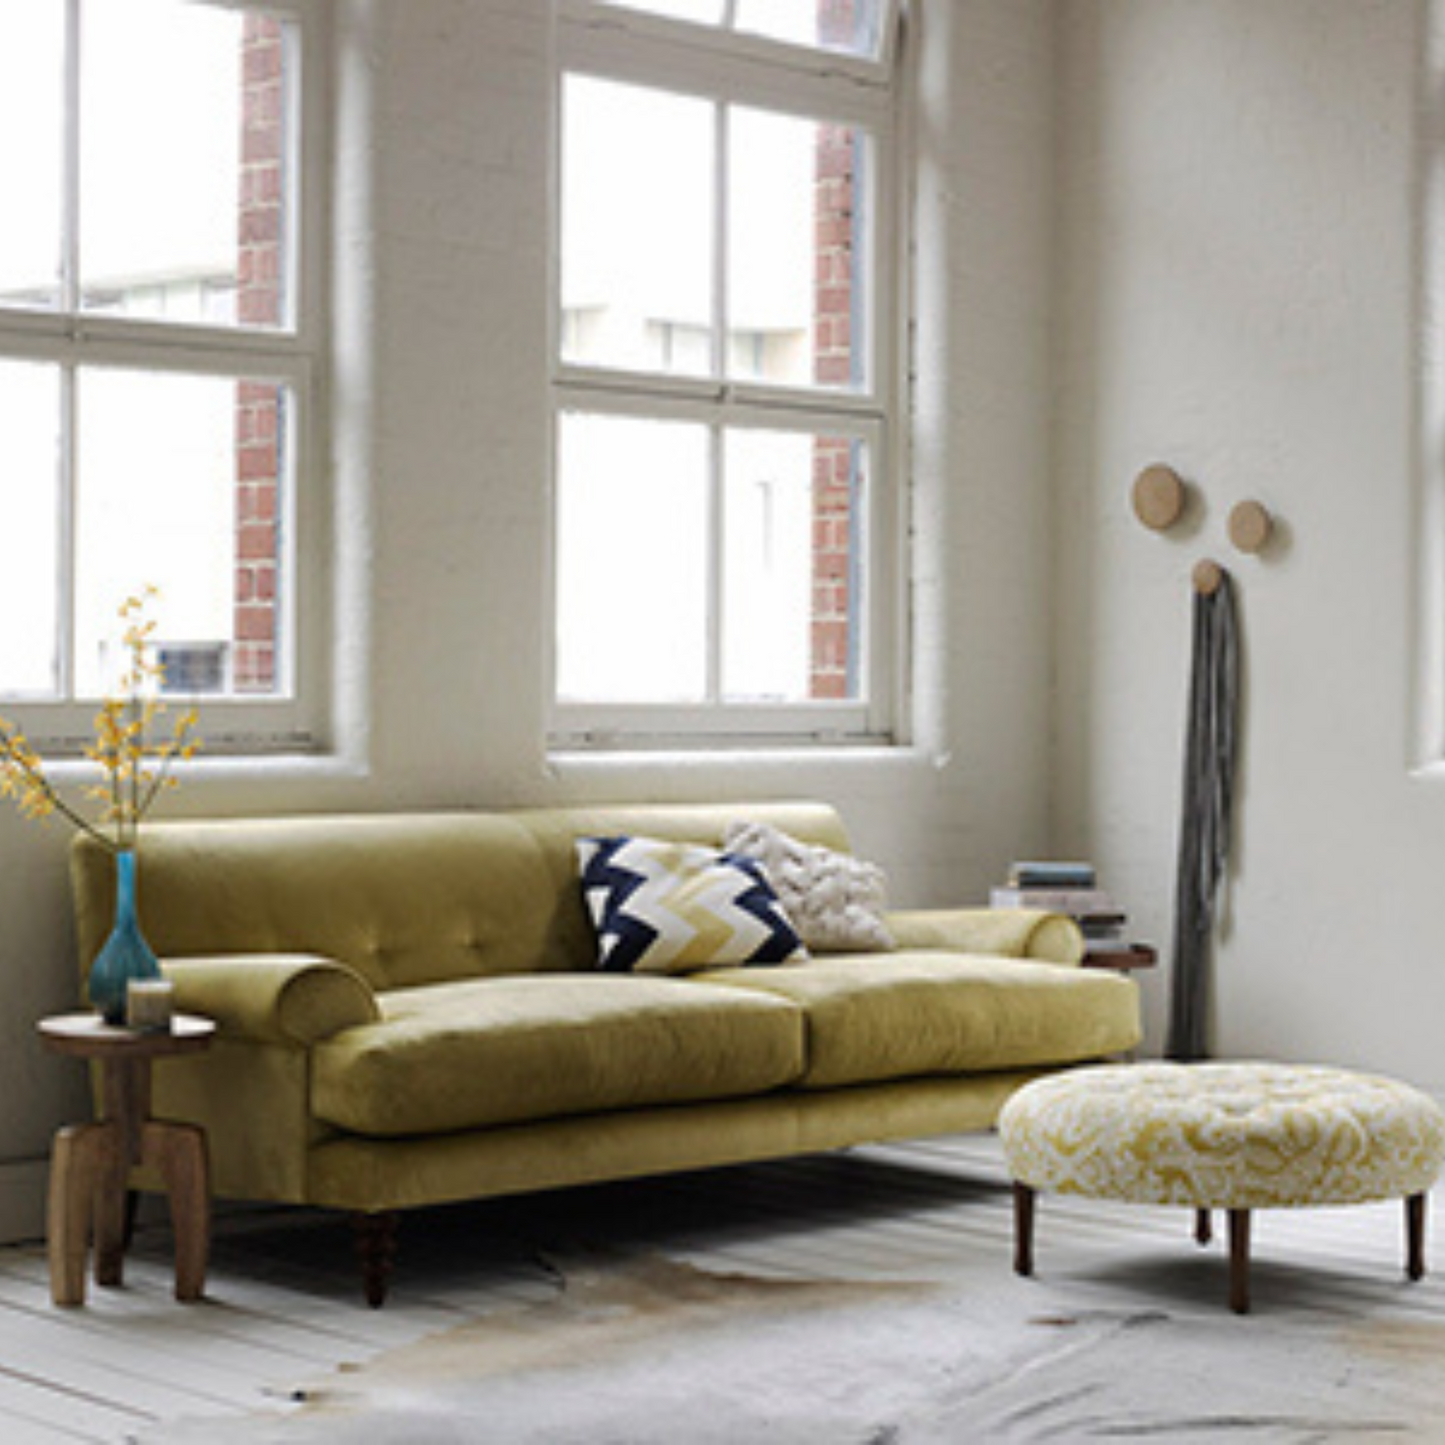 Coogee Sofa by Molmic